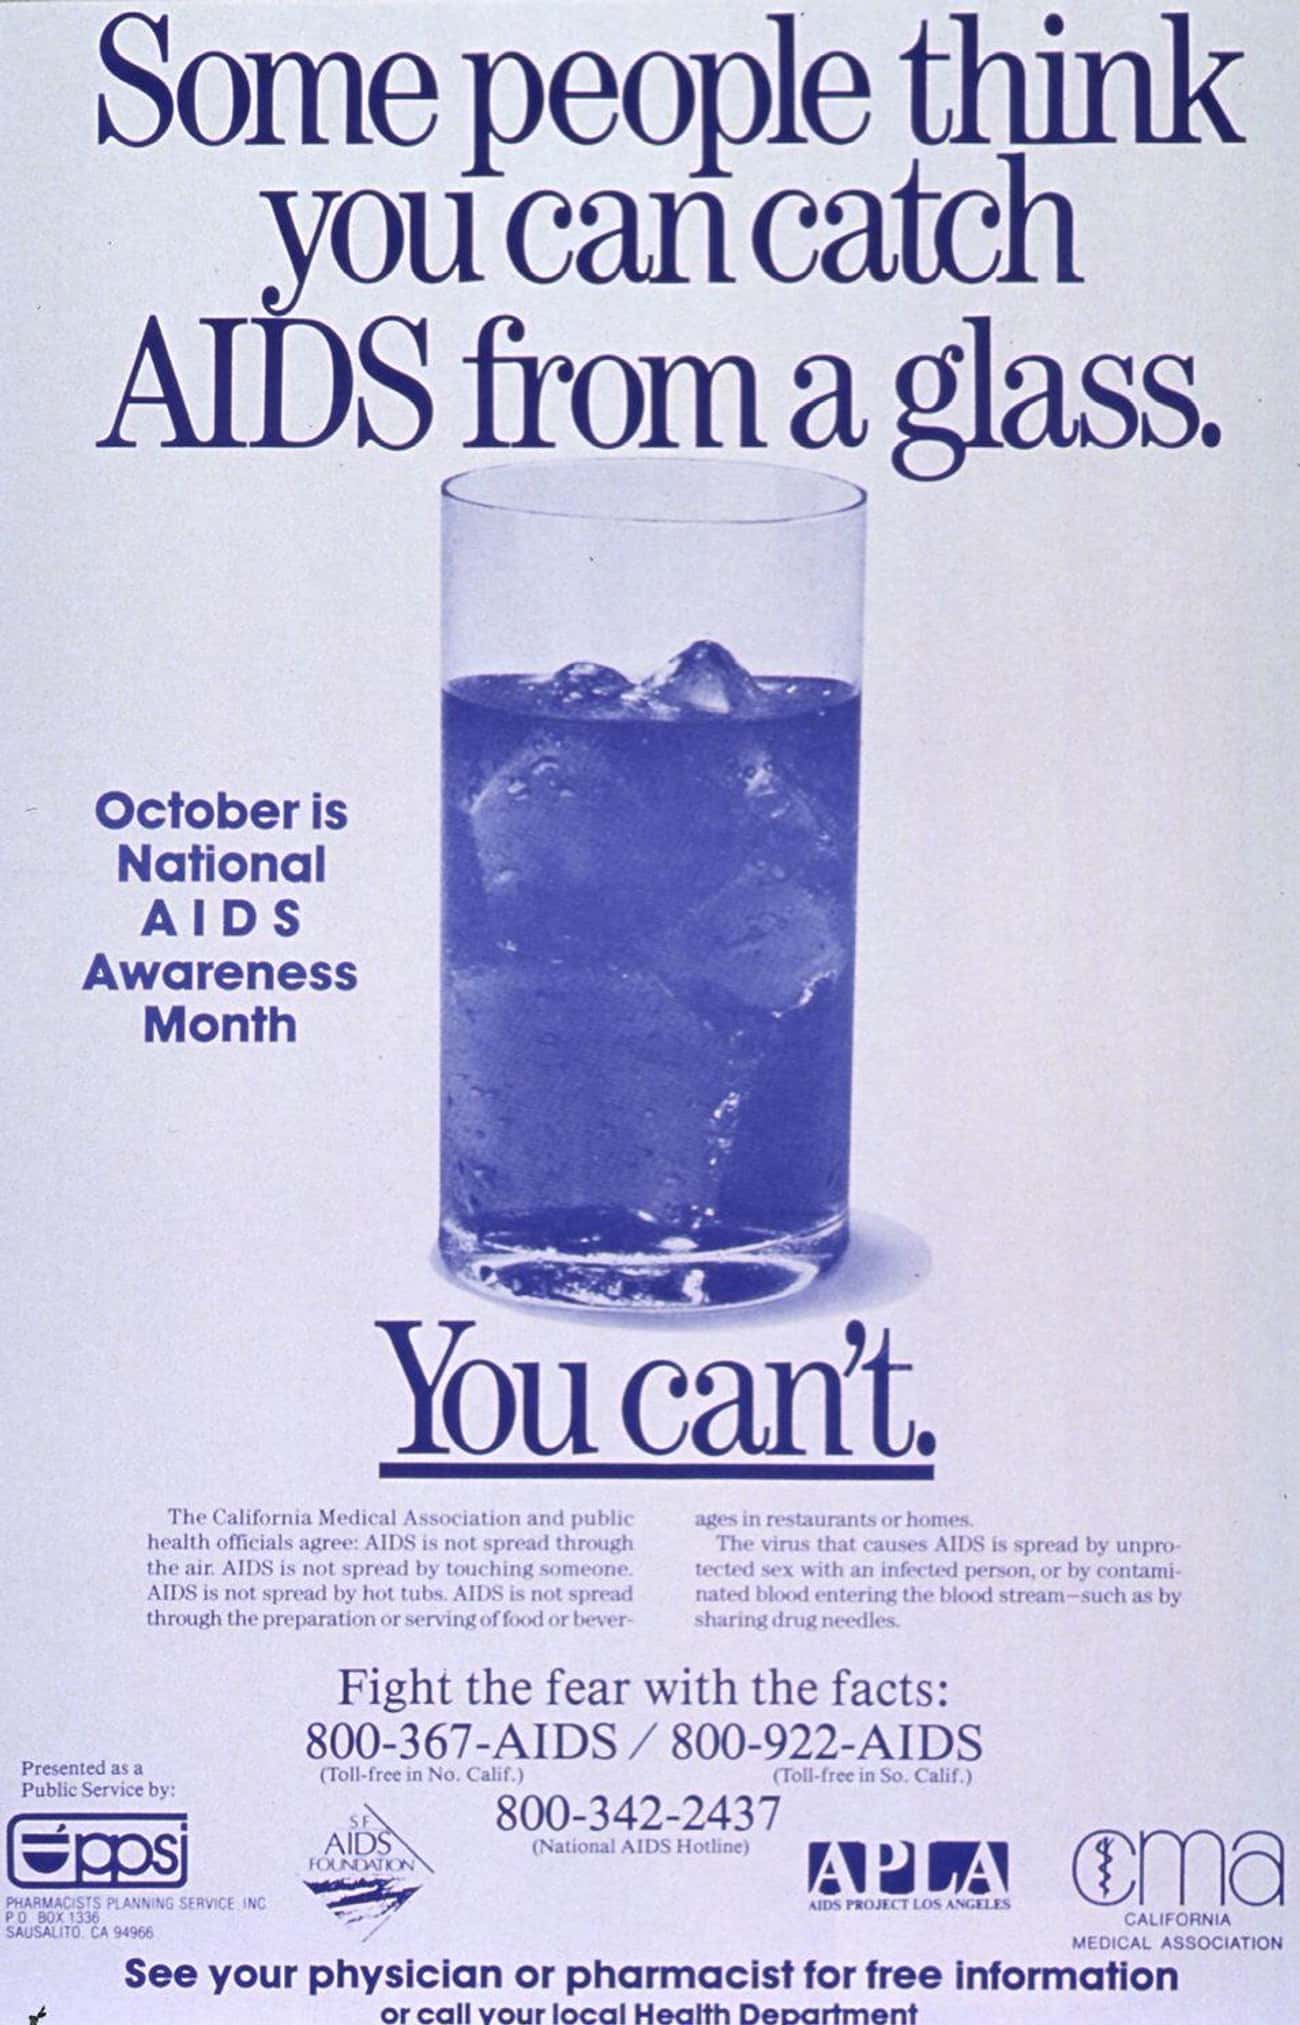 The Stigmatization of AIDS Patients Was Based On A Myth